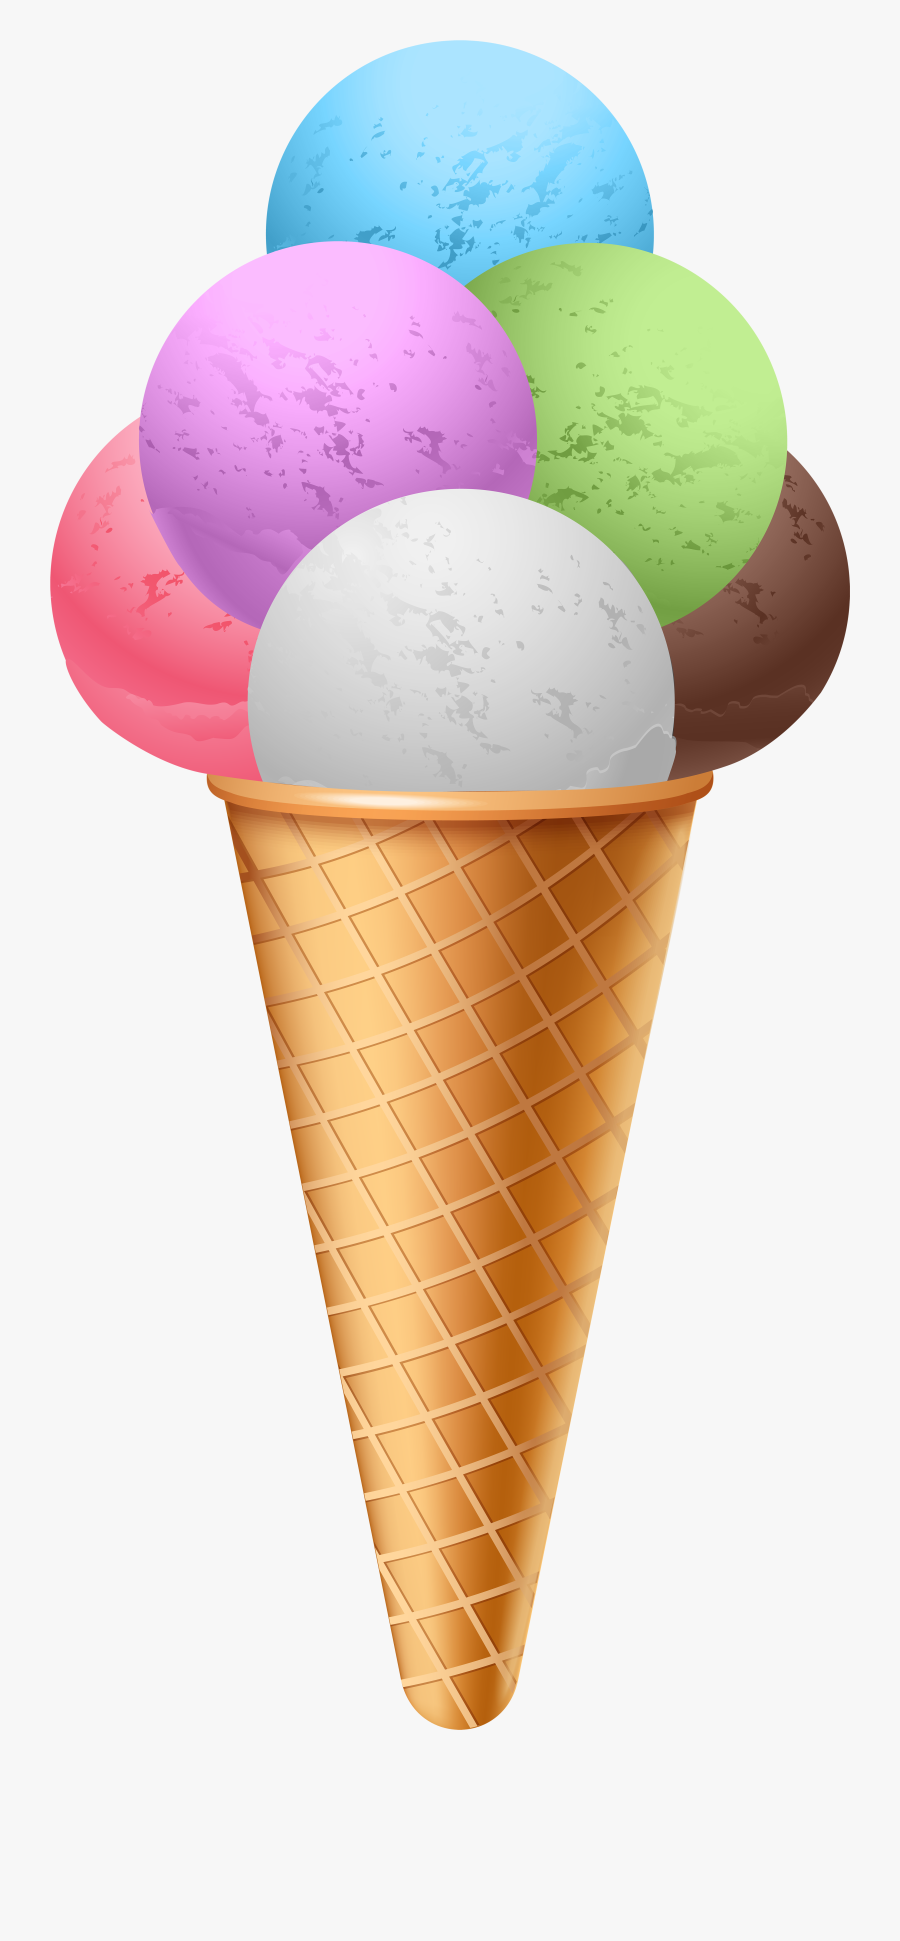 Halloween Clipart Ice Cream - Ice Cream Png Clipart, Transparent Clipart